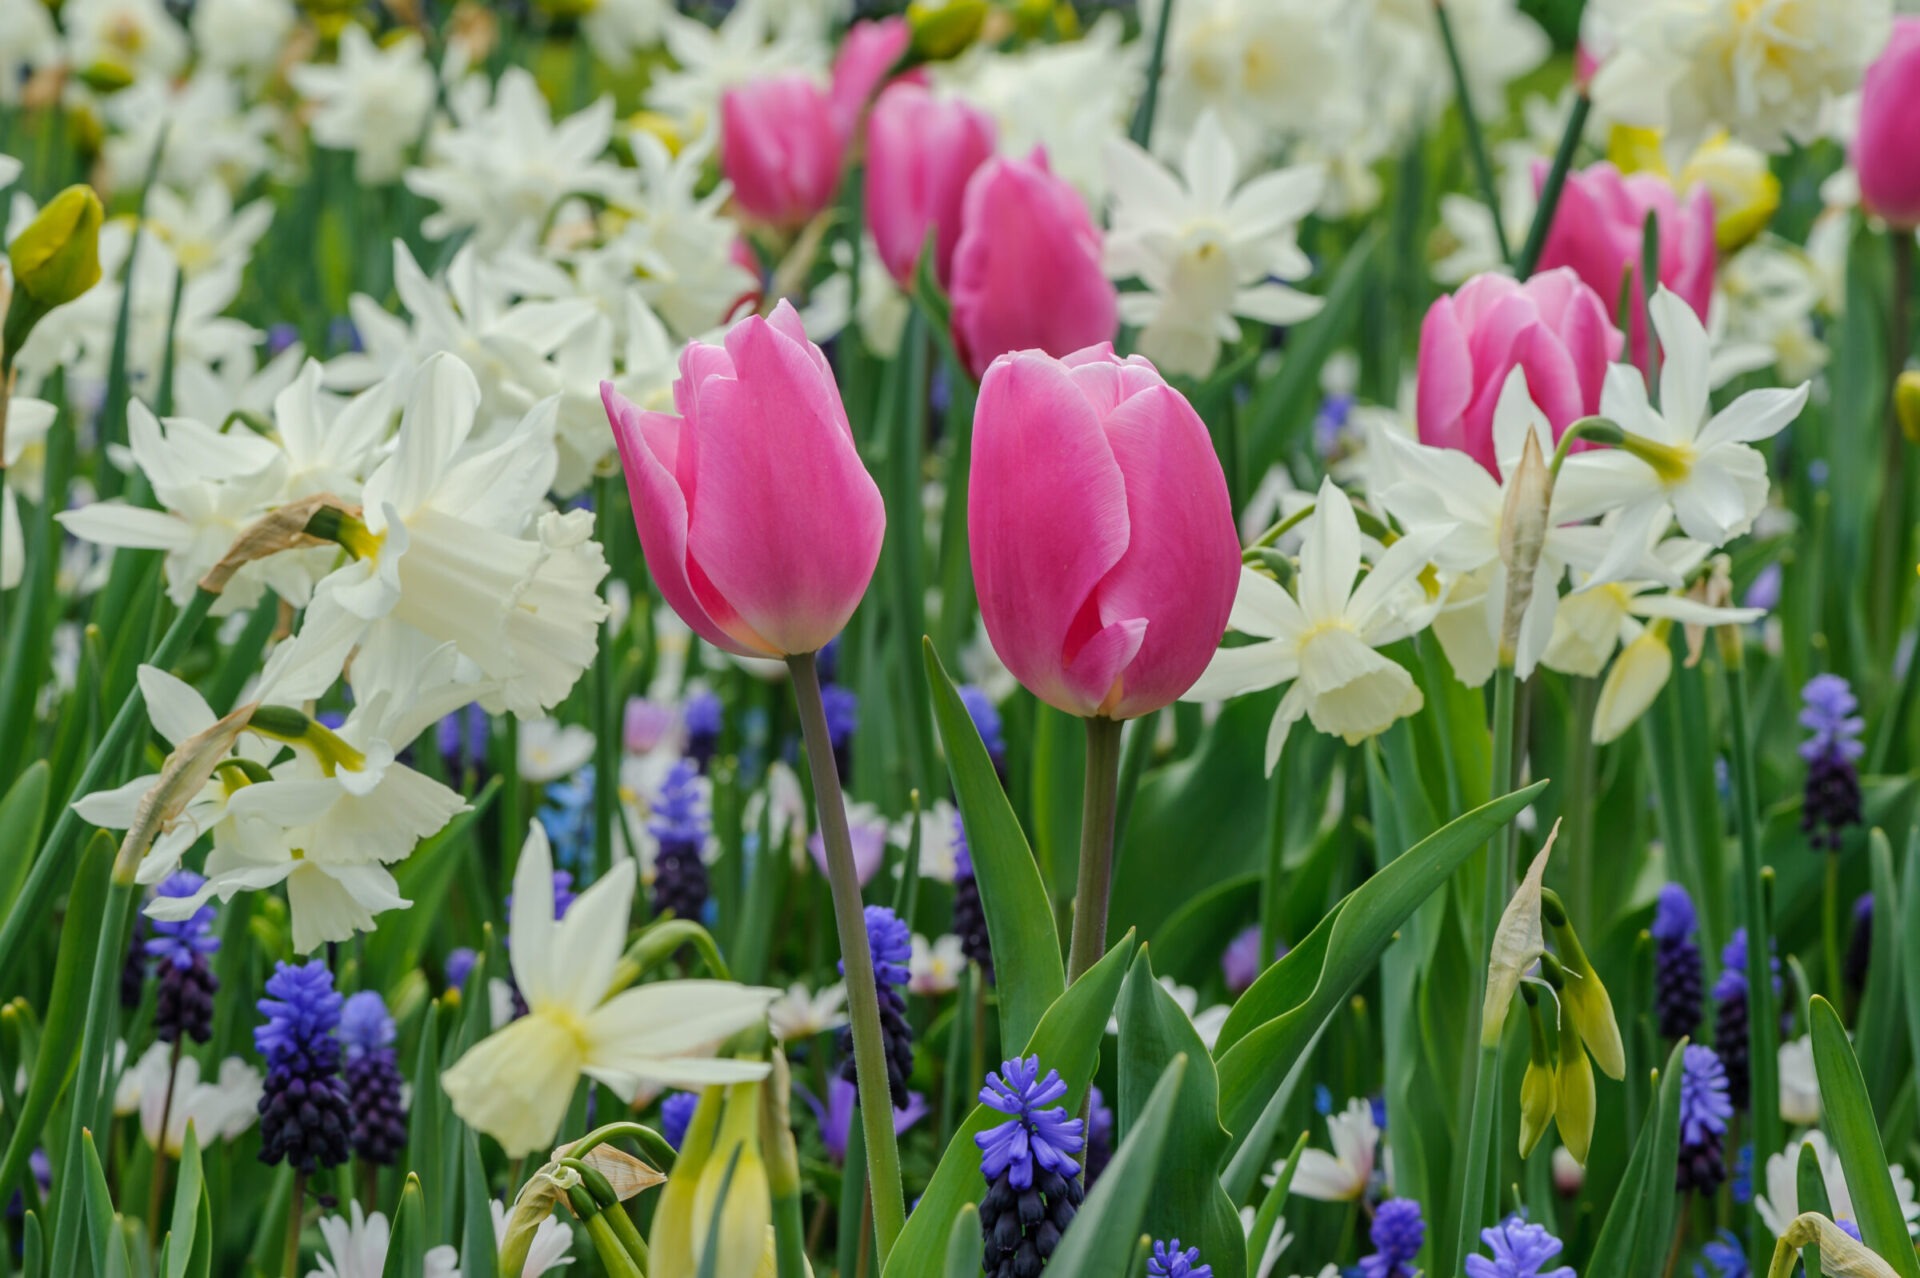 A vibrant garden with pink tulips, white daffodils, and blue grape hyacinths amidst green foliage, showcasing a lively mix of spring flowers.